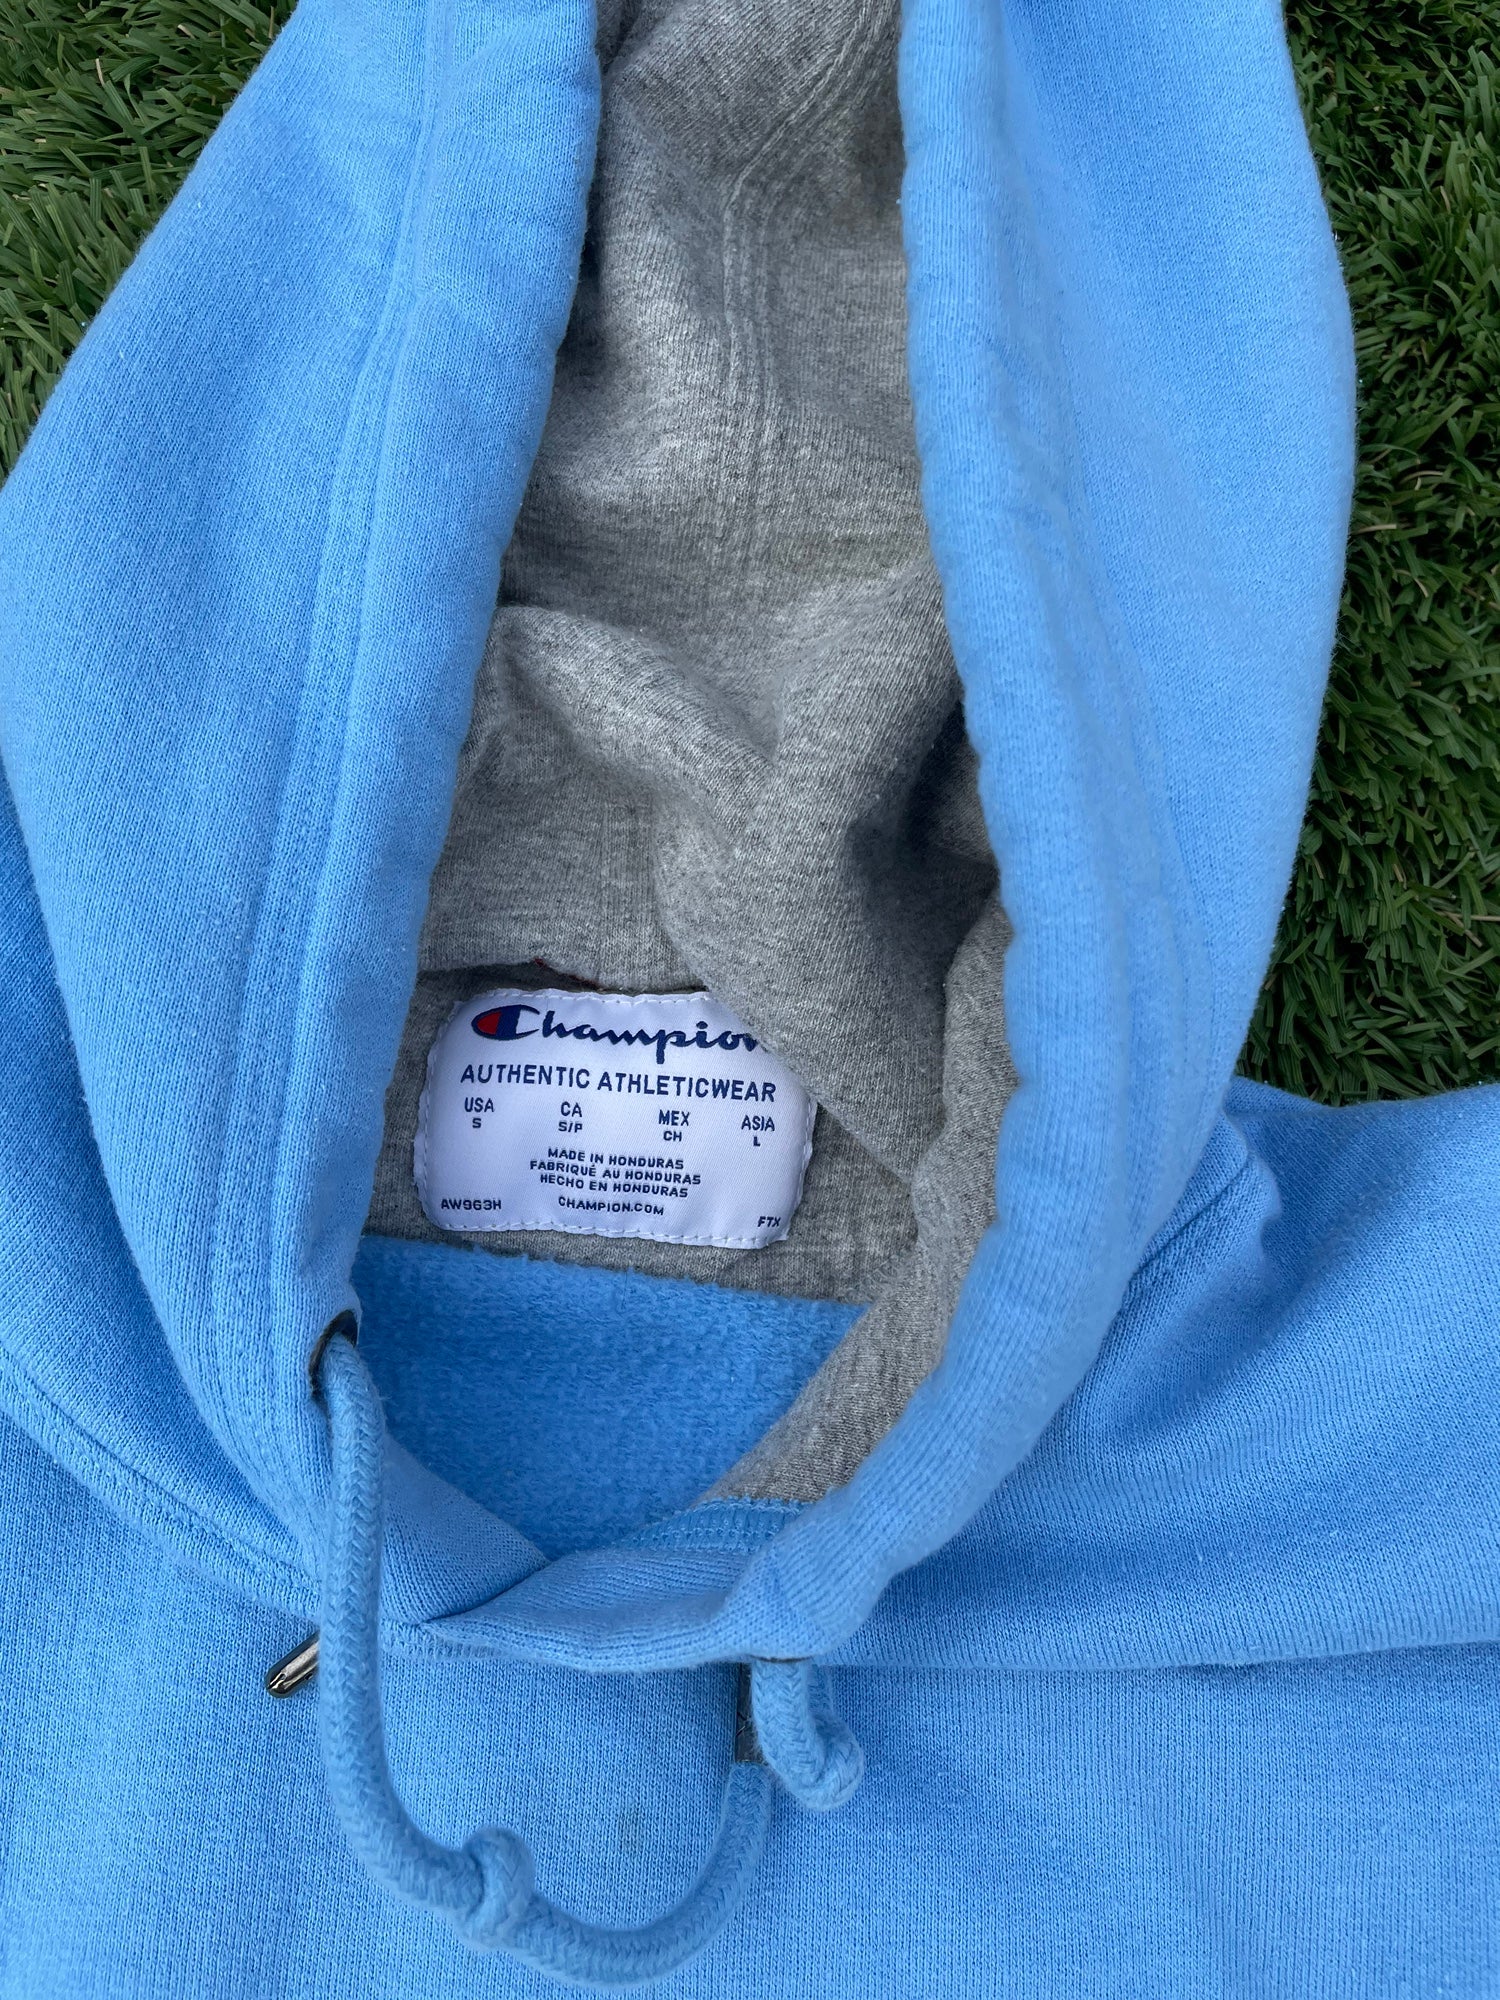 Andre steder Mutton volleyball Champion light blue hoodie | SidelineSwap